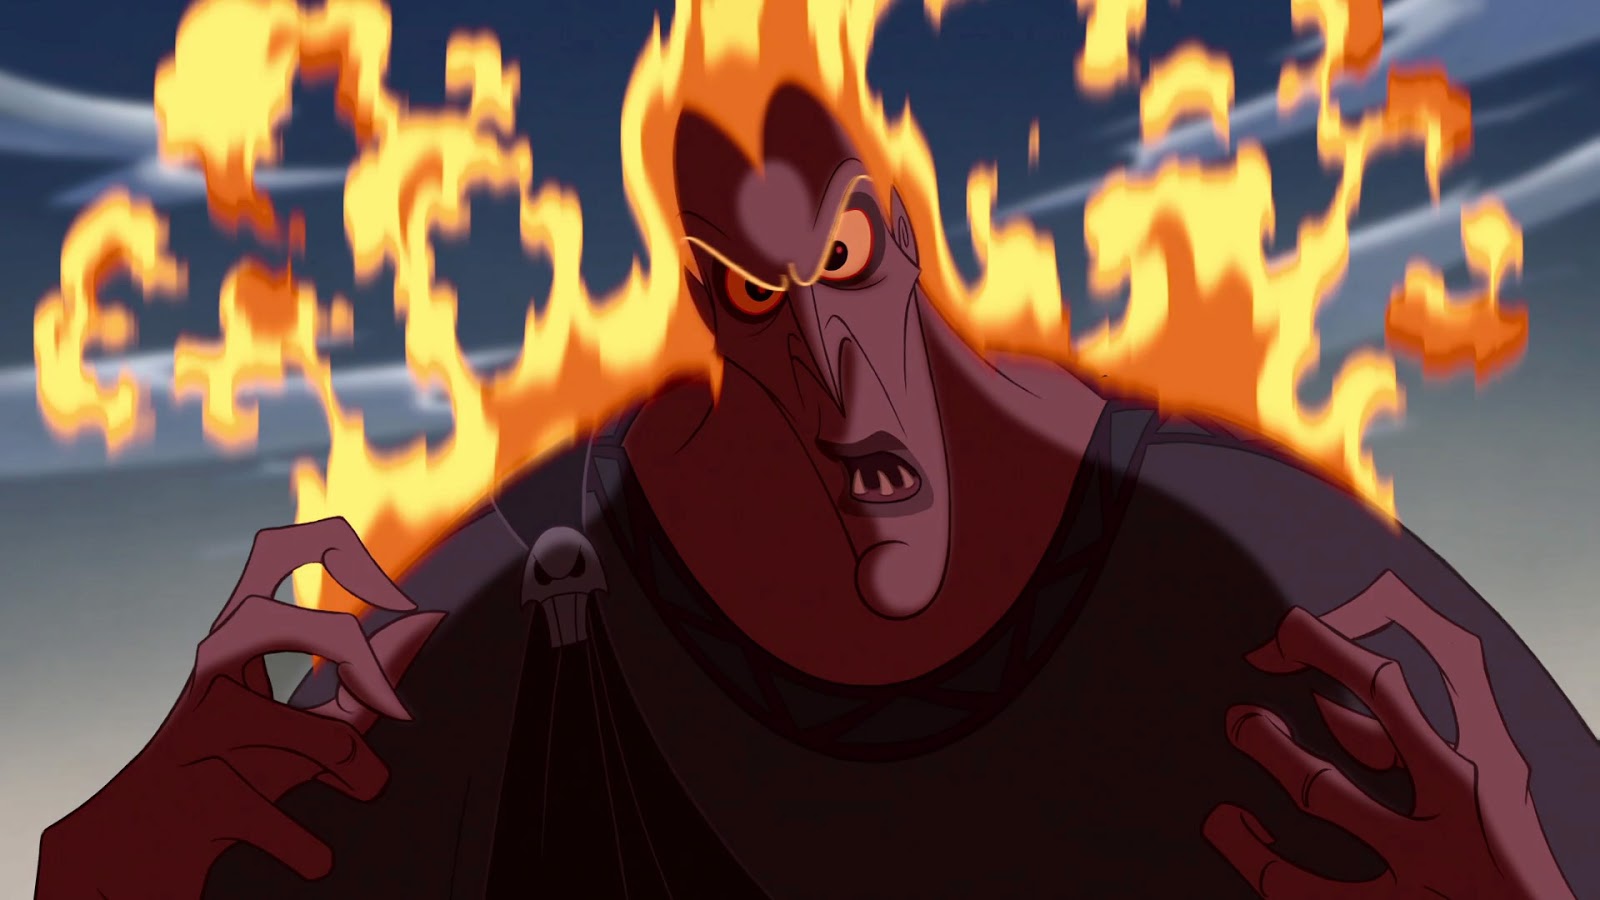 Hades - God of the Underworld and the Secondary Villain.